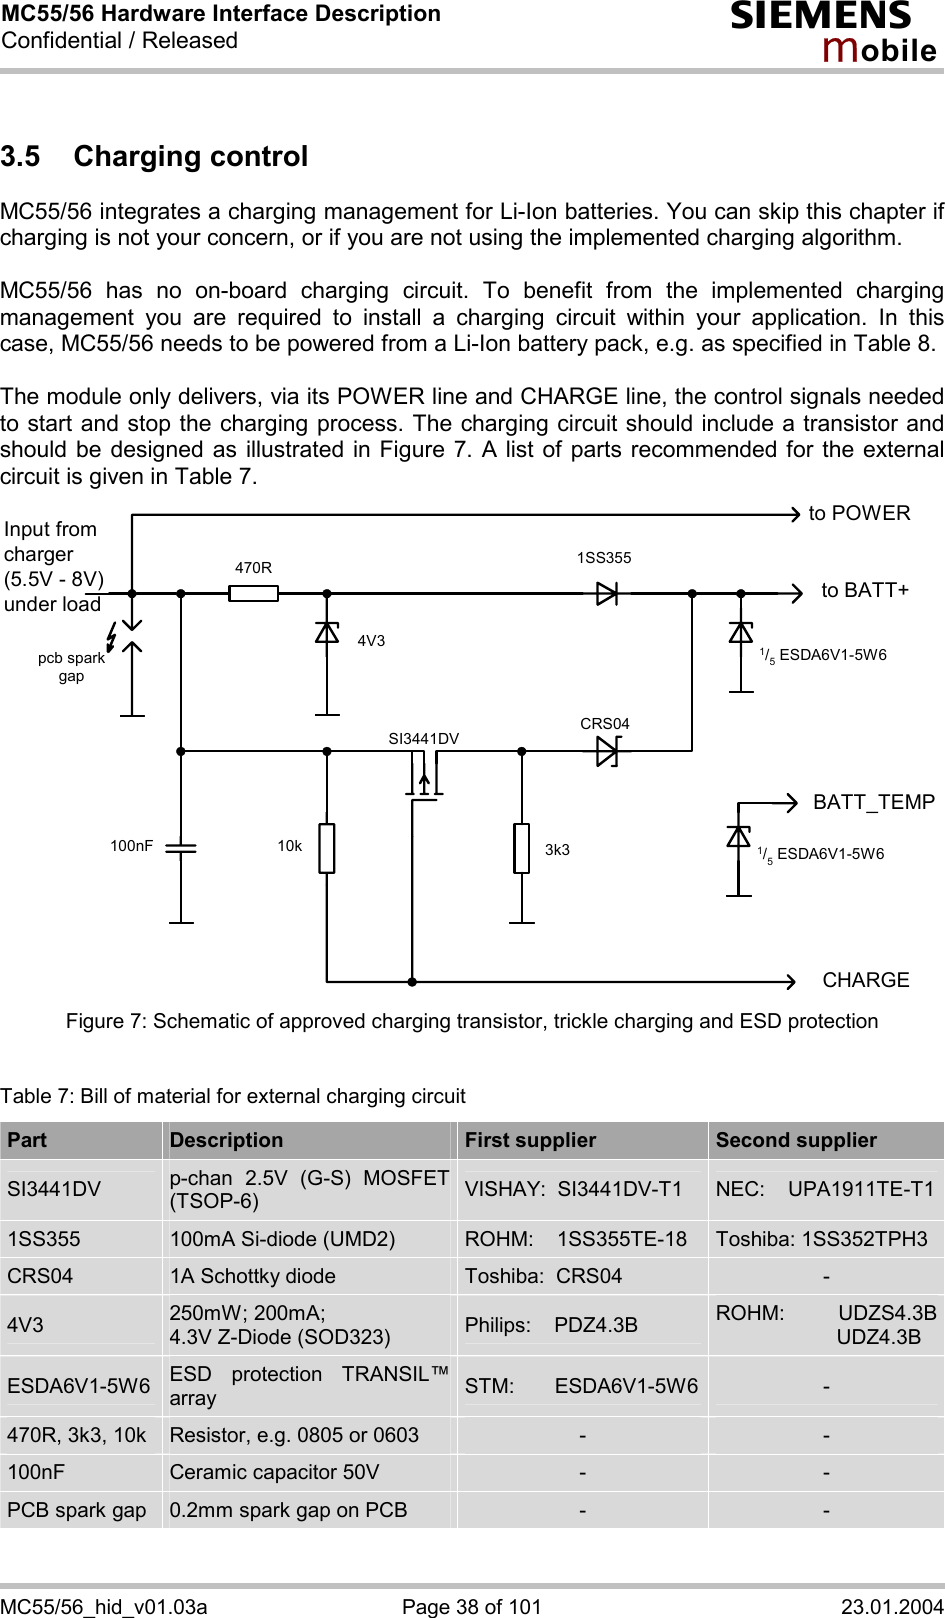 MC55/56 Hardware Interface Description Confidential / Released s mo b i l e MC55/56_hid_v01.03a  Page 38 of 101  23.01.2004 3.5 Charging control MC55/56 integrates a charging management for Li-Ion batteries. You can skip this chapter if charging is not your concern, or if you are not using the implemented charging algorithm.  MC55/56 has no on-board charging circuit. To benefit from the implemented charging management you are required to install a charging circuit within your application. In this case, MC55/56 needs to be powered from a Li-Ion battery pack, e.g. as specified in Table 8.  The module only delivers, via its POWER line and CHARGE line, the control signals needed to start and stop the charging process. The charging circuit should include a transistor and should be designed as illustrated in Figure 7. A list of parts recommended for the external circuit is given in Table 7.  to BATT+Input fromcharger(5.5V - 8V)under loadCHARGE470R 1SS355CRS043k3100nF 10kSI3441DV4V3 1/5 ESDA6V1-5W6pcb sparkgapto POWERBATT_TEMP1/5 ESDA6V1-5W6 Figure 7: Schematic of approved charging transistor, trickle charging and ESD protection  Table 7: Bill of material for external charging circuit Part  Description  First supplier  Second supplier SI3441DV  p-chan 2.5V (G-S) MOSFET (TSOP-6)  VISHAY:  SI3441DV-T1  NEC:    UPA1911TE-T11SS355  100mA Si-diode (UMD2)  ROHM:    1SS355TE-18  Toshiba: 1SS352TPH3 CRS04  1A Schottky diode   Toshiba:  CRS04  - 4V3  250mW; 200mA; 4.3V Z-Diode (SOD323)  Philips:    PDZ4.3B  ROHM: UDZS4.3B                     UDZ4.3B ESDA6V1-5W6  ESD protection TRANSIL™ array  STM:       ESDA6V1-5W6  - 470R, 3k3, 10k  Resistor, e.g. 0805 or 0603  -  - 100nF  Ceramic capacitor 50V  -  - PCB spark gap  0.2mm spark gap on PCB  -  - 